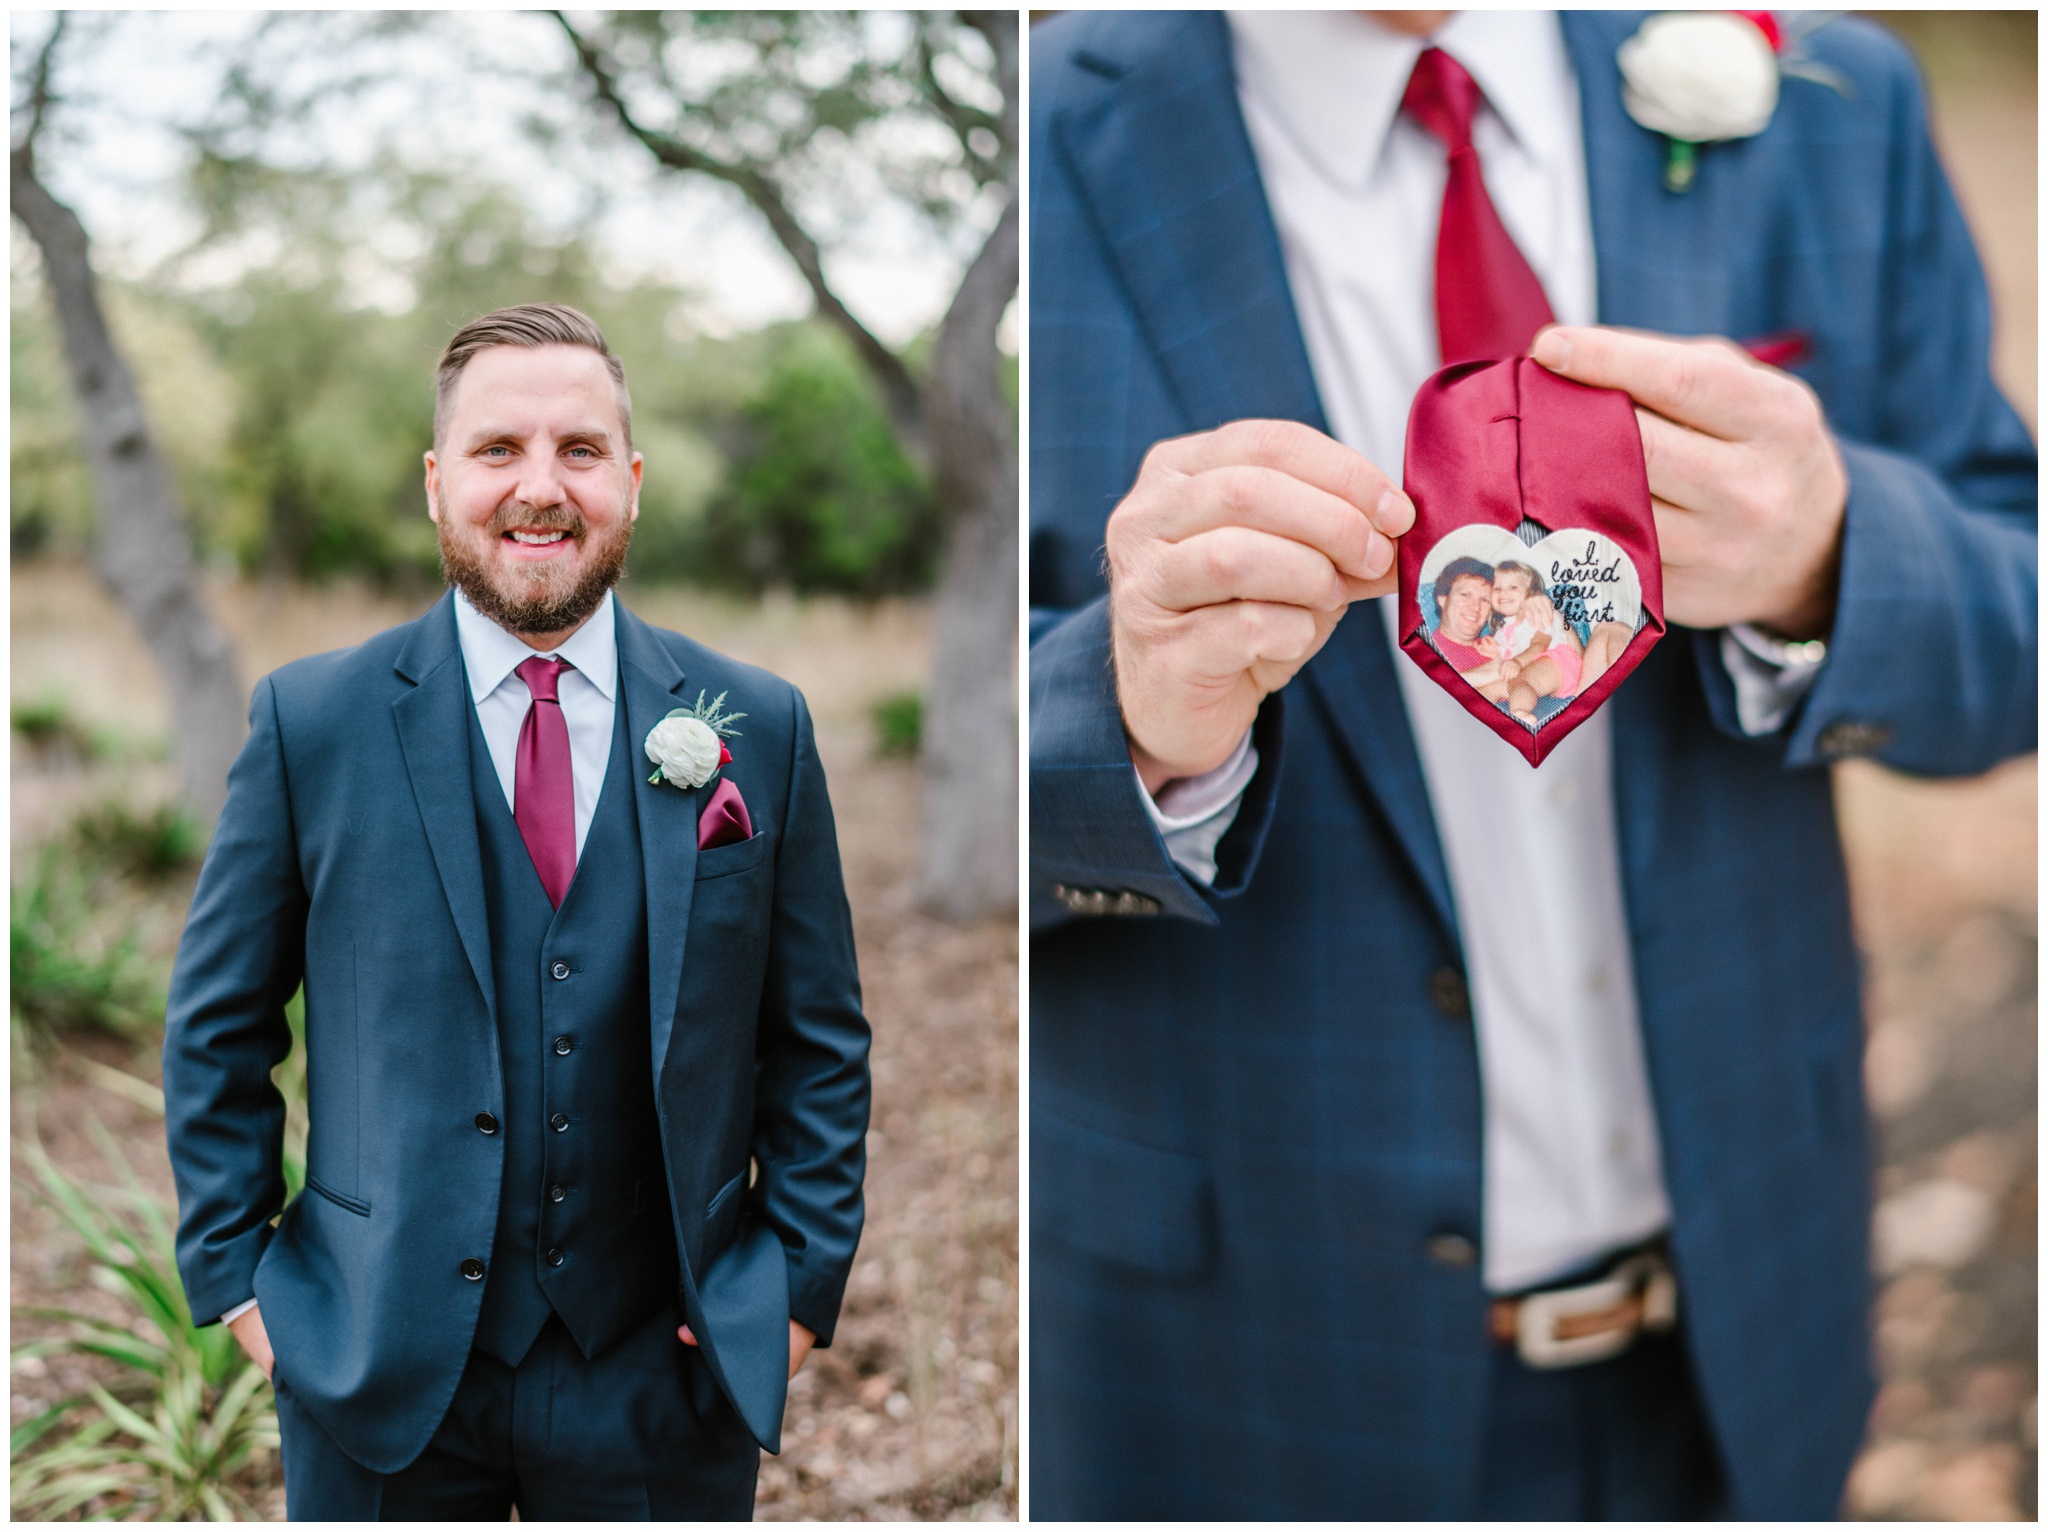 Special Note from mom on back of groom's tie, Joslyn Holtfort Austin TX Wedding Photographer